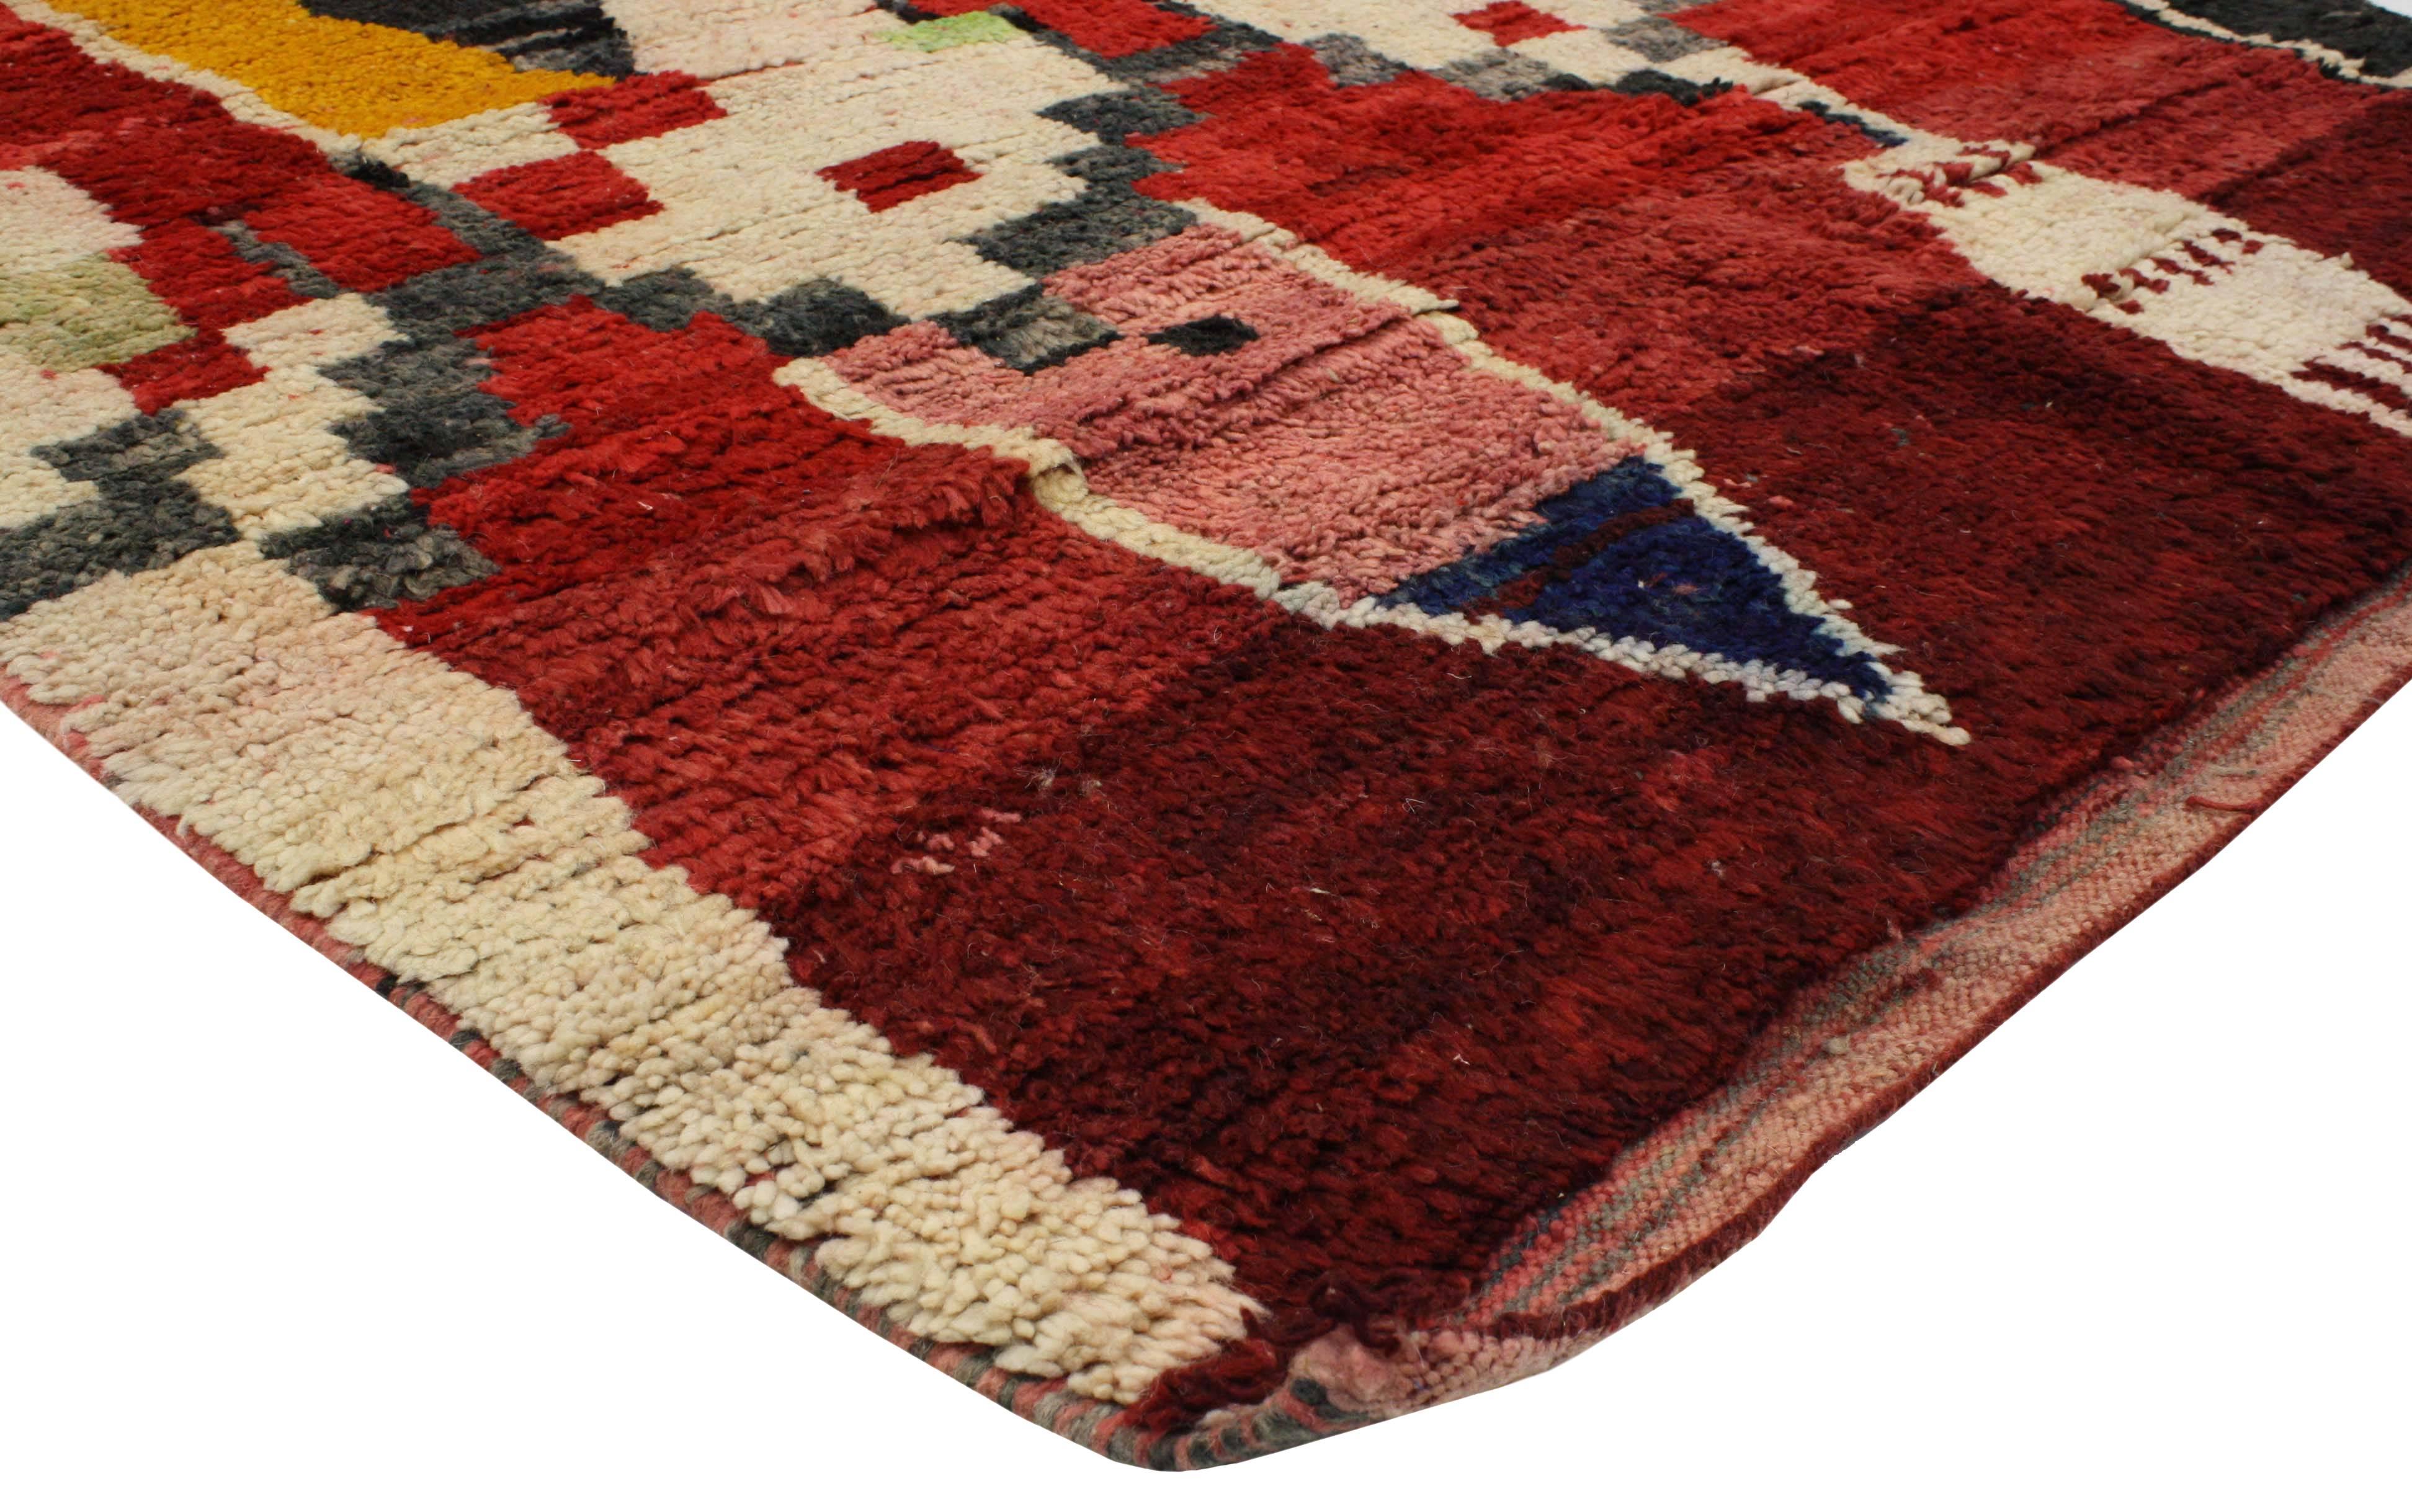 20290 Contemporary Berber Moroccan Rehamna Rug with Post-Modern Expressionist Style. Highly stylish yet casually elegant, this Boho Chic Berber Moroccan rug with a contemporary abstract style is ideal for nearly any stylish interior. This